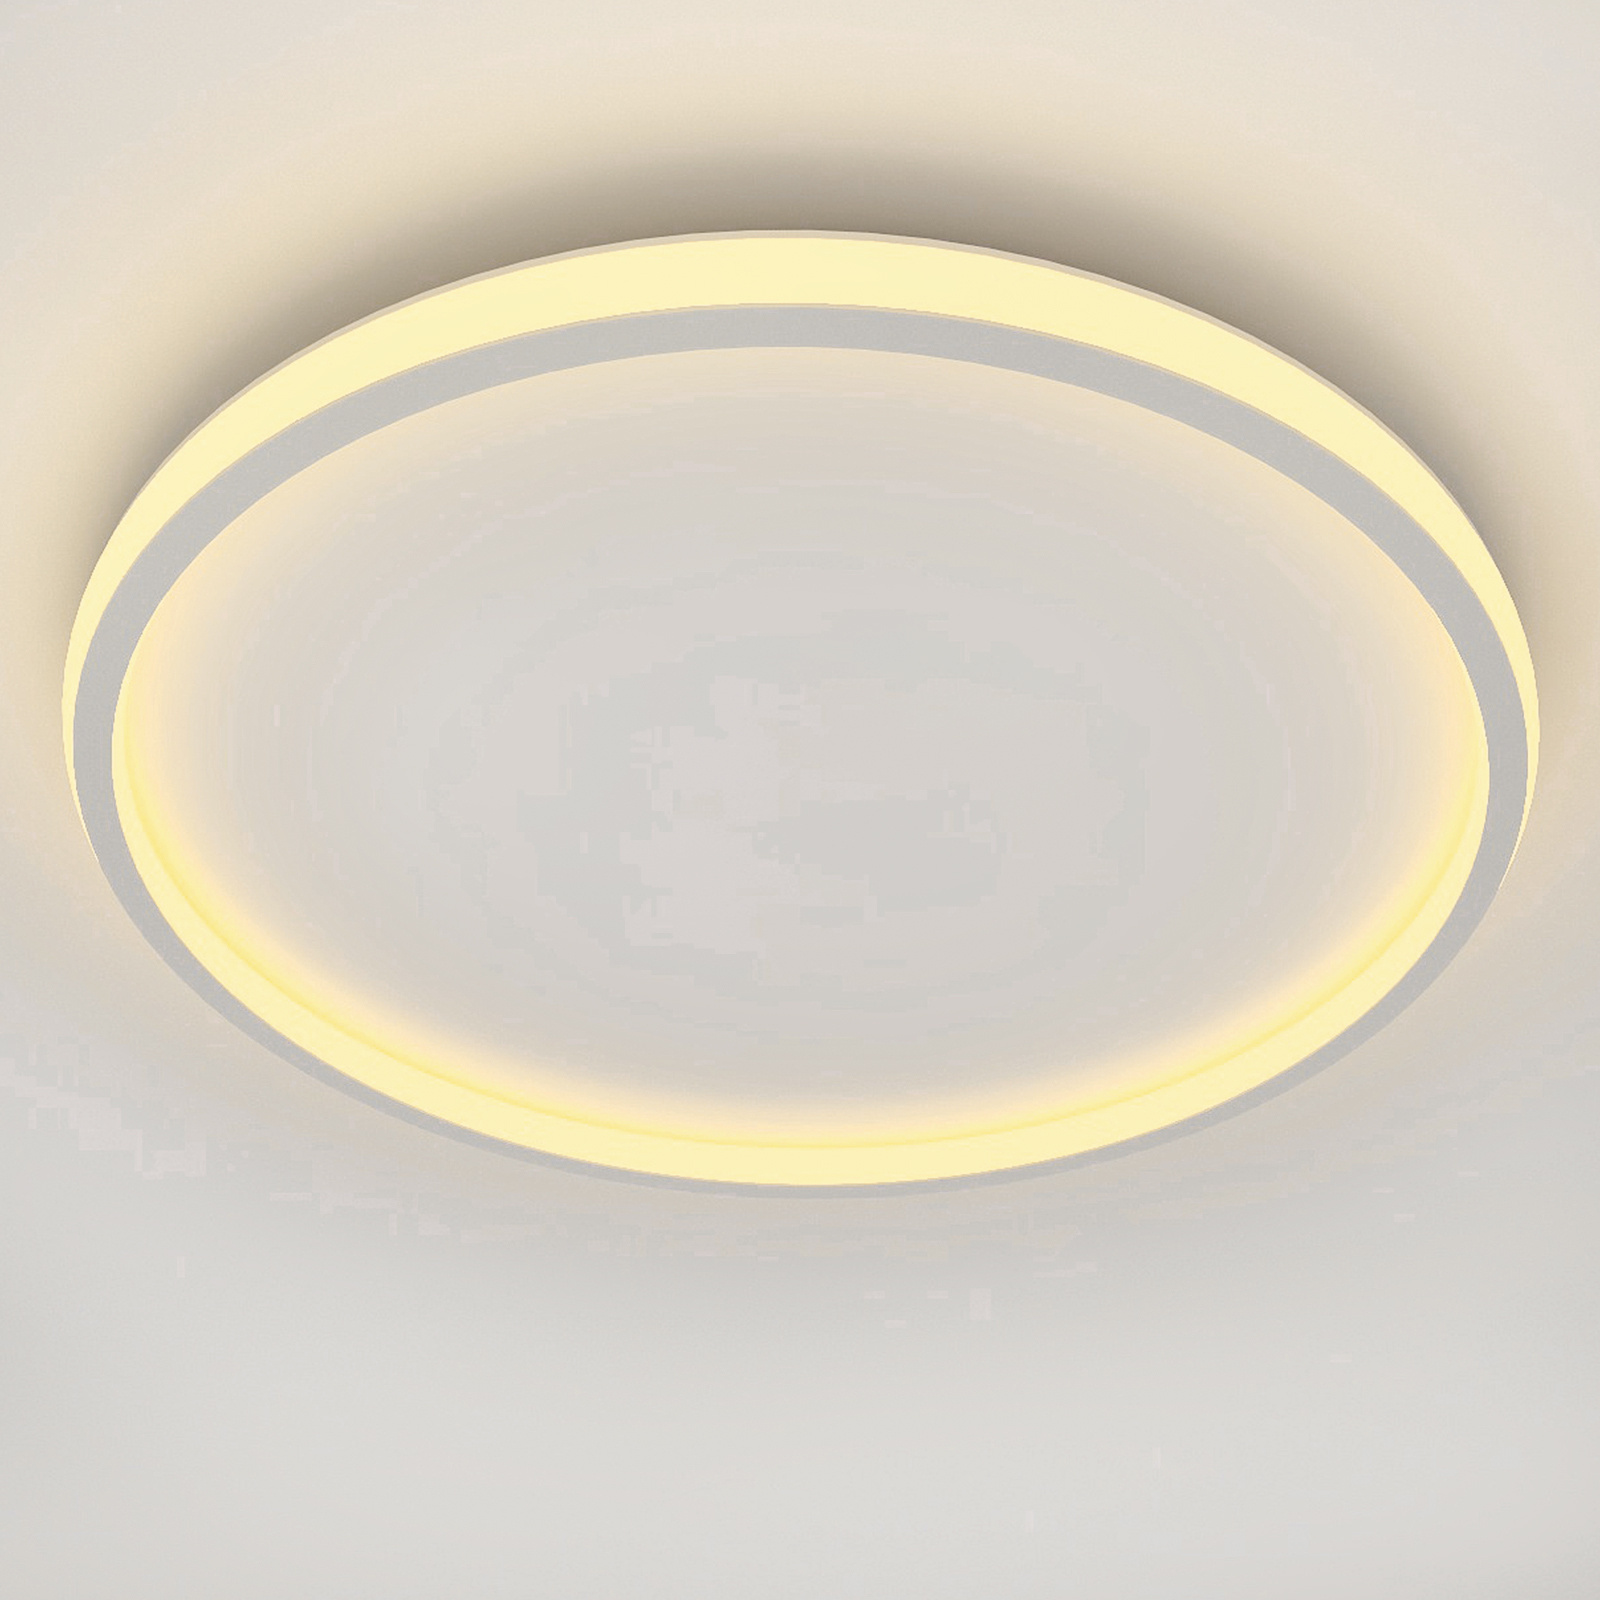 Flush Mount LED Ceiling Light,Cheeroll 12 Inch Ceiling Lighting Fixture 45W 3000K Warm Round Ceiling Light,for Bathroom, Kitchen, Bedroom, Living Room,Garage Non Dimmable